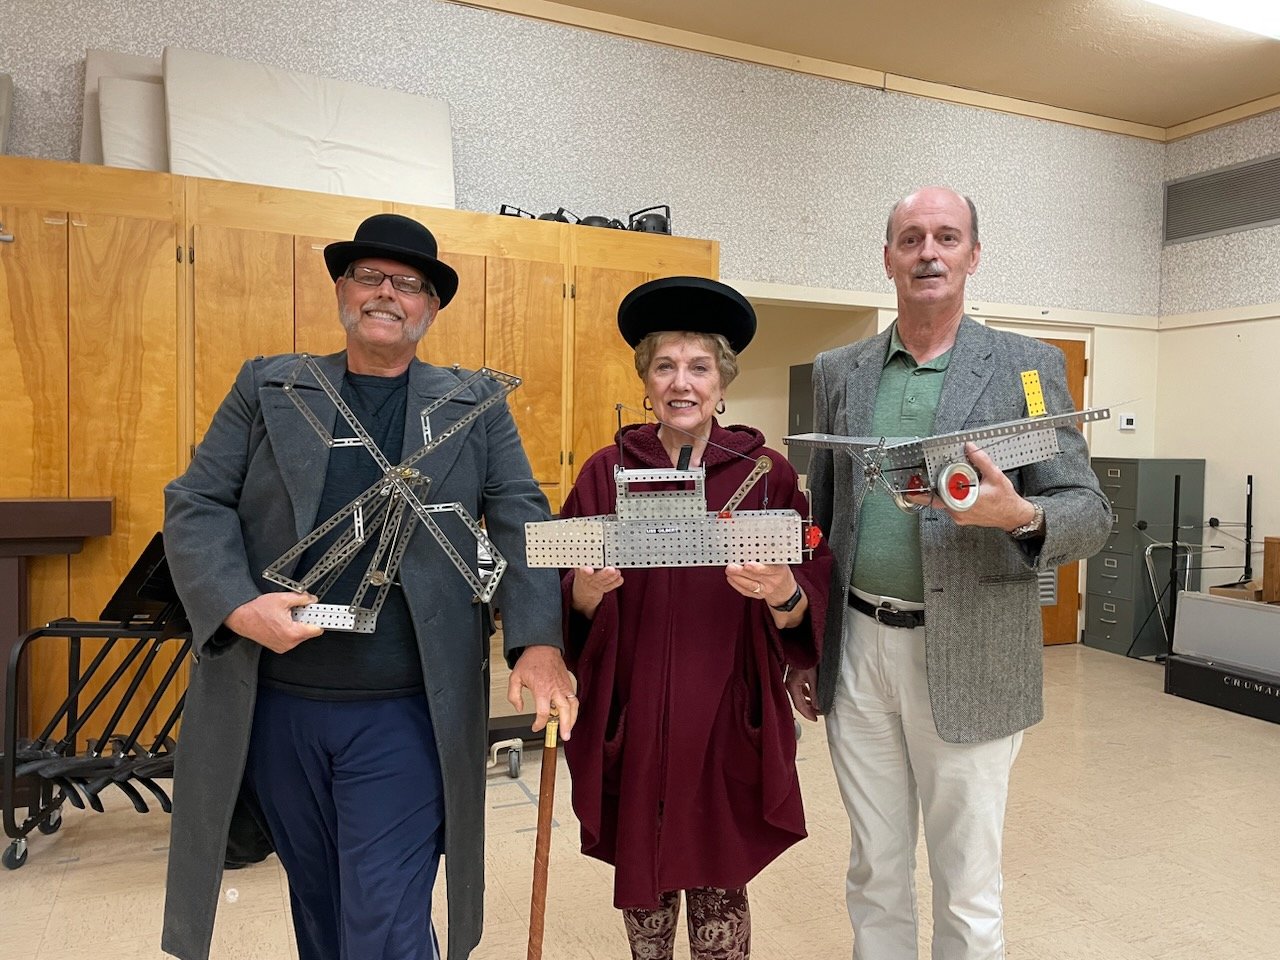 Left to right are Daniel Taylor as Government Council-Secretary Baker, Karen Warren as a factory worker and Don Harlow as A.C. Gilbert.